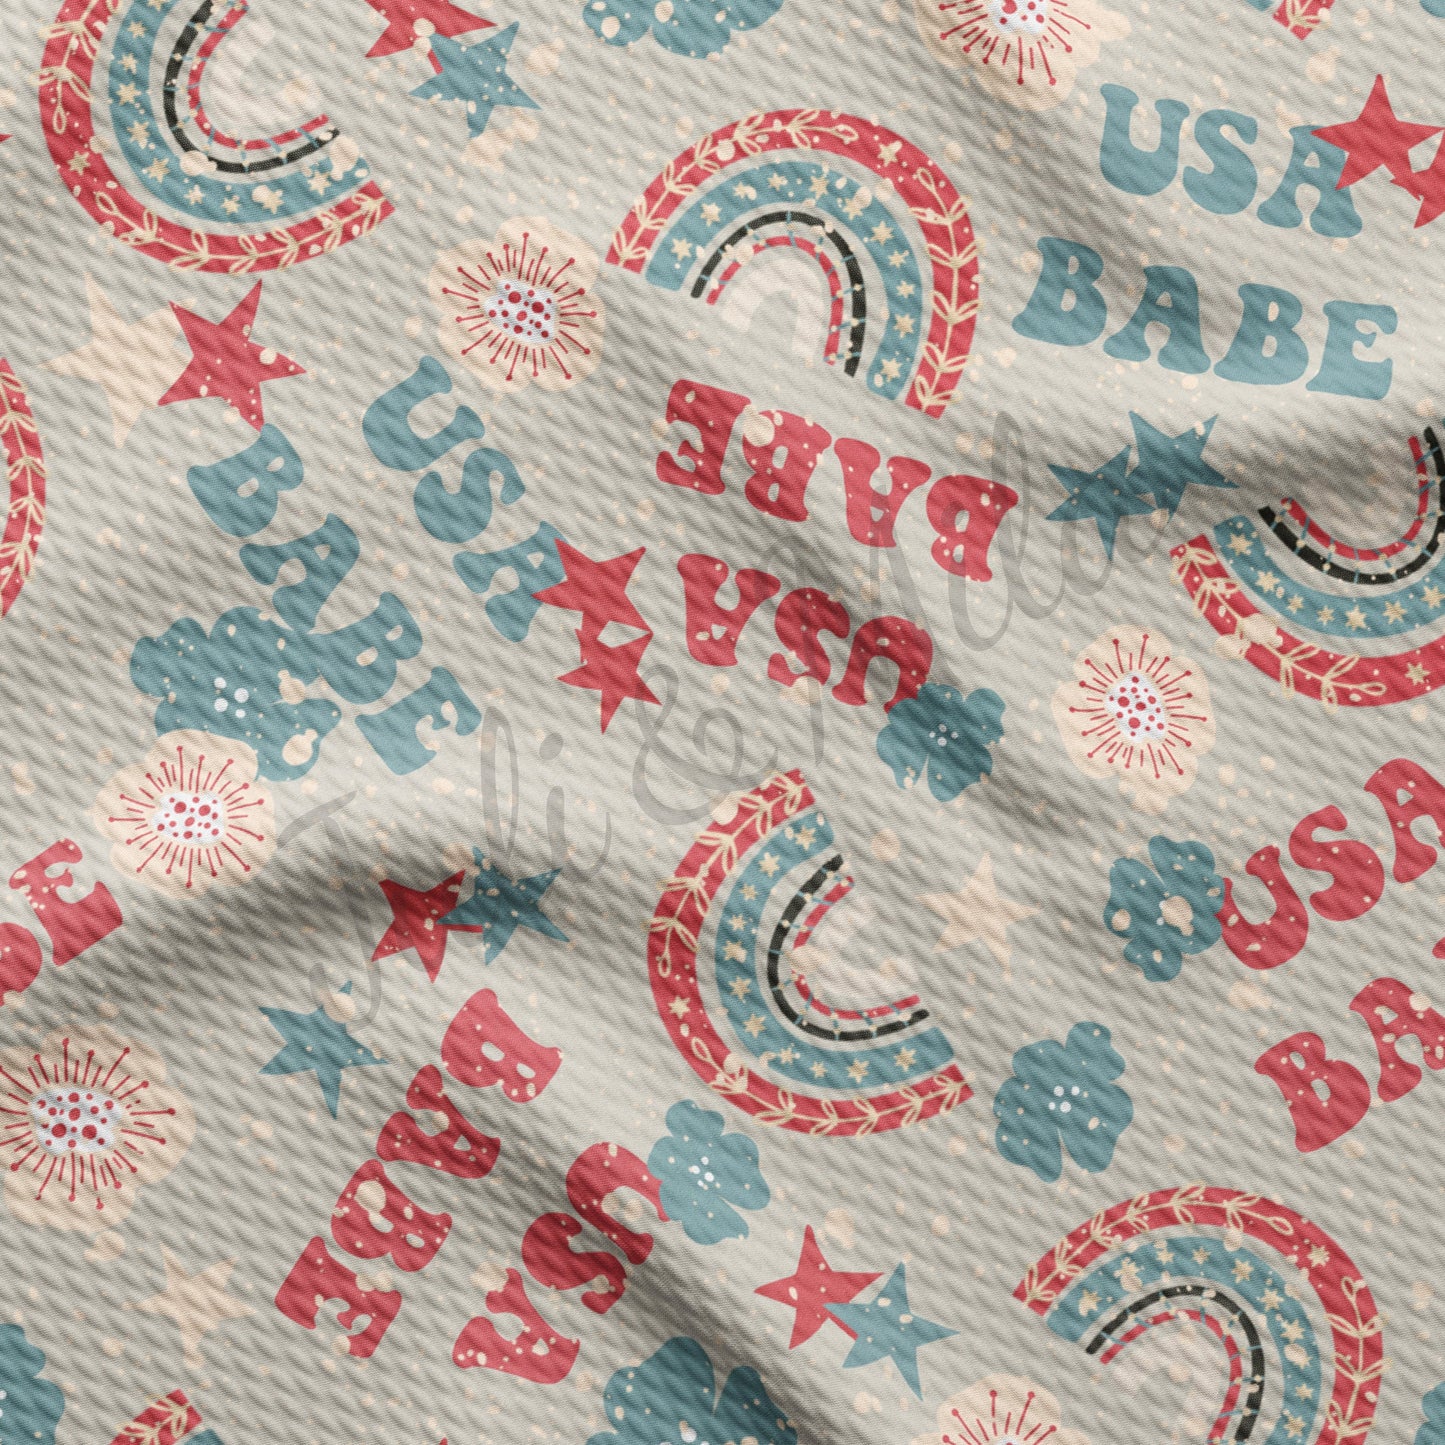 USA Babe 4th of July Patriotic USA  Bullet Fabric PT93